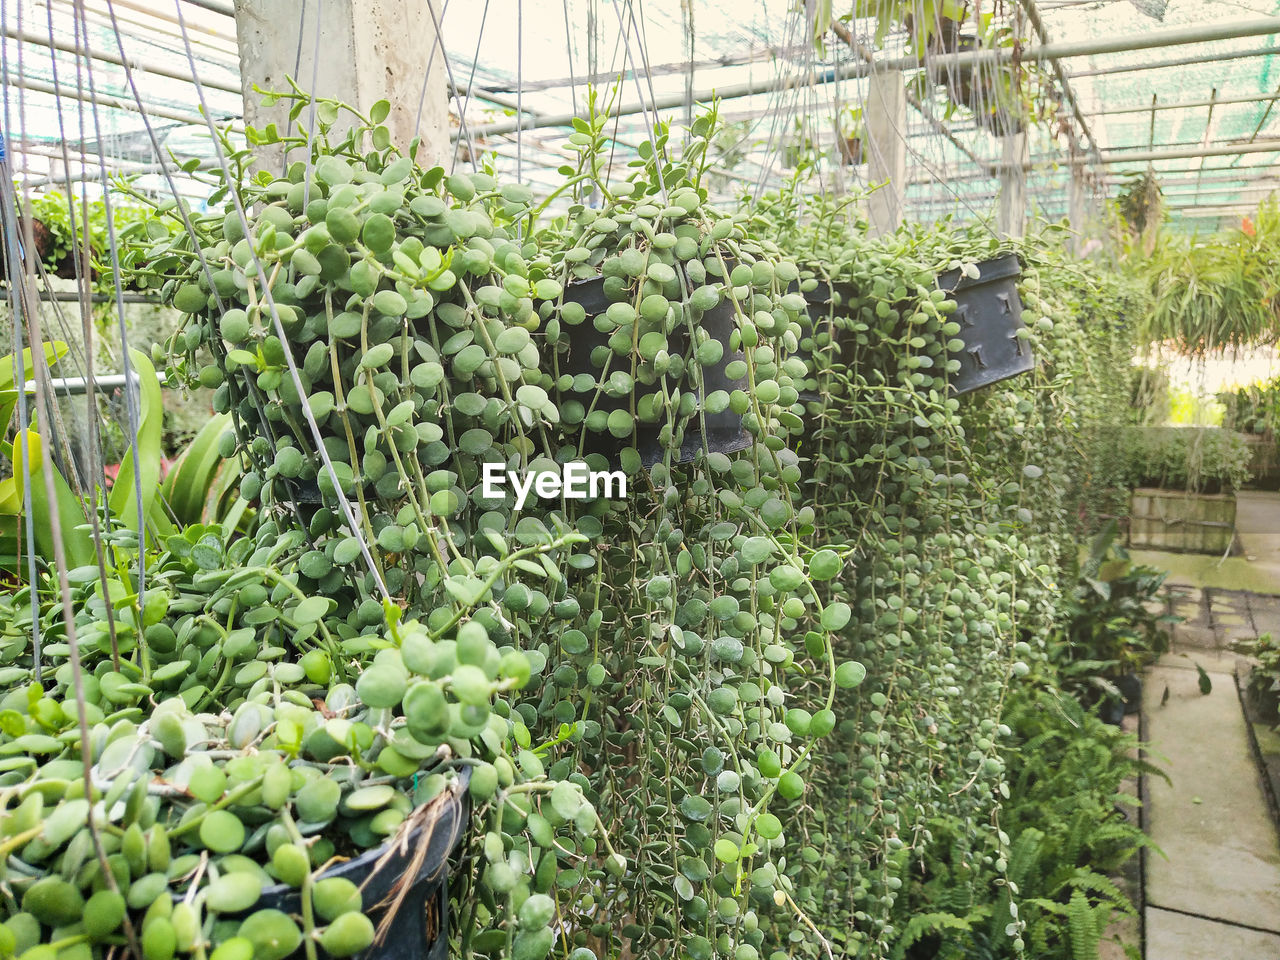 PLANTS IN GREENHOUSE